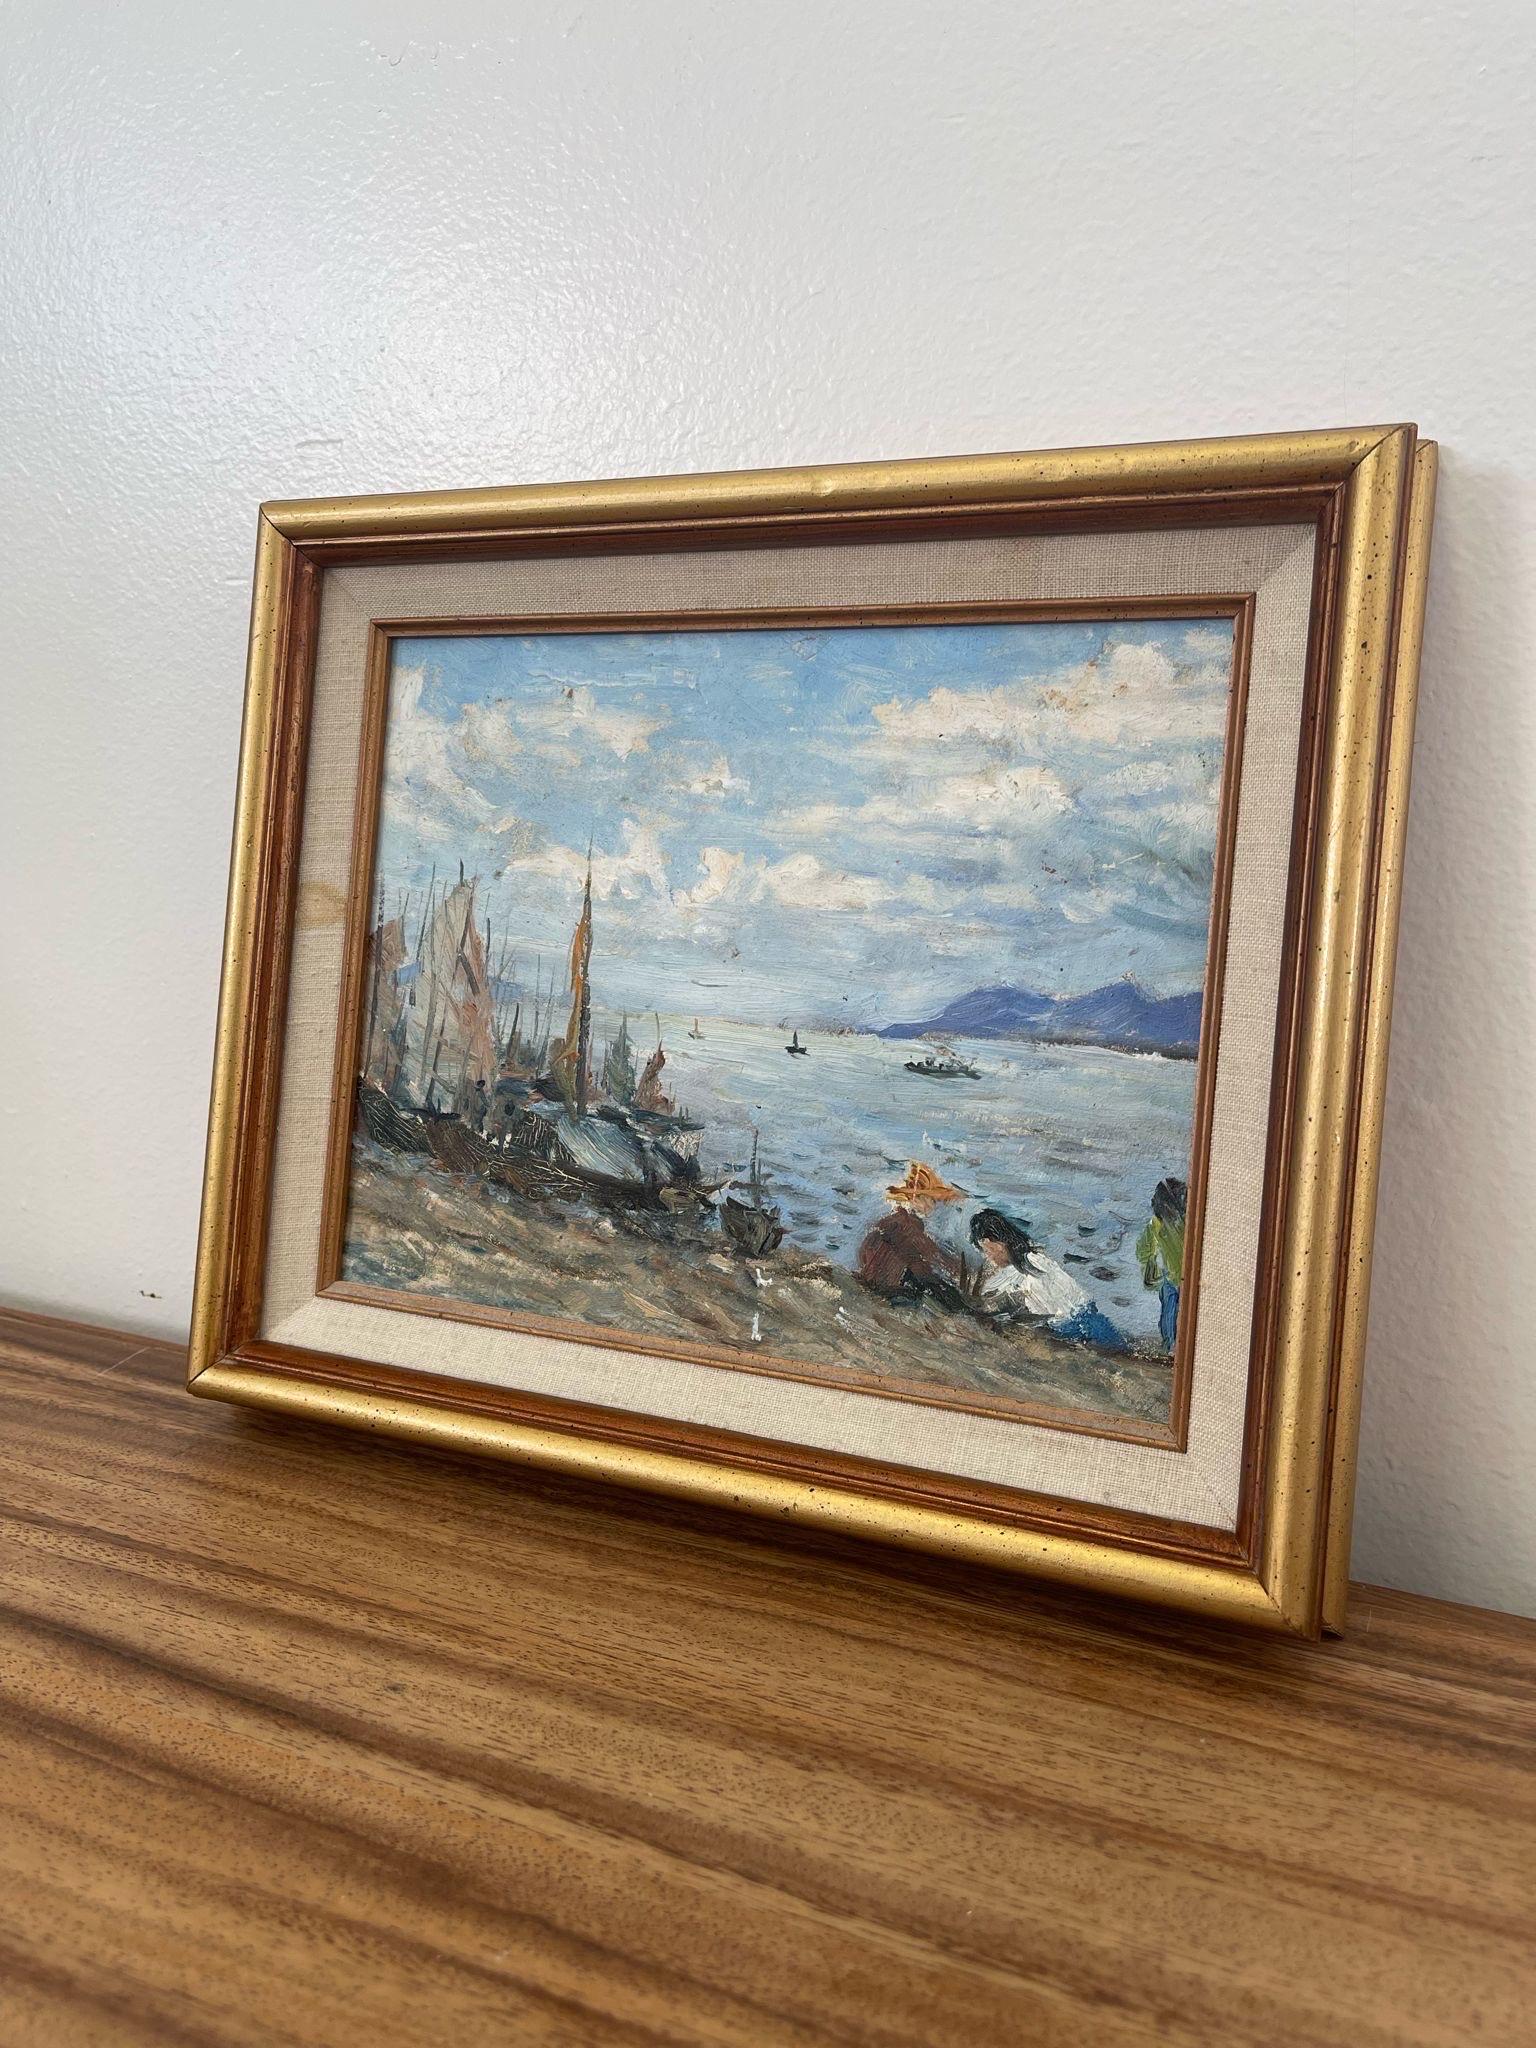 Frame is from Mexico, as the Back Shows. Possibly Acrylic or Gouache Paint. Abstract Sea Scene. Vintage Condition Consistent with Age as Pictured.

Dimensions. 8 W ; 1 D ; 10 H